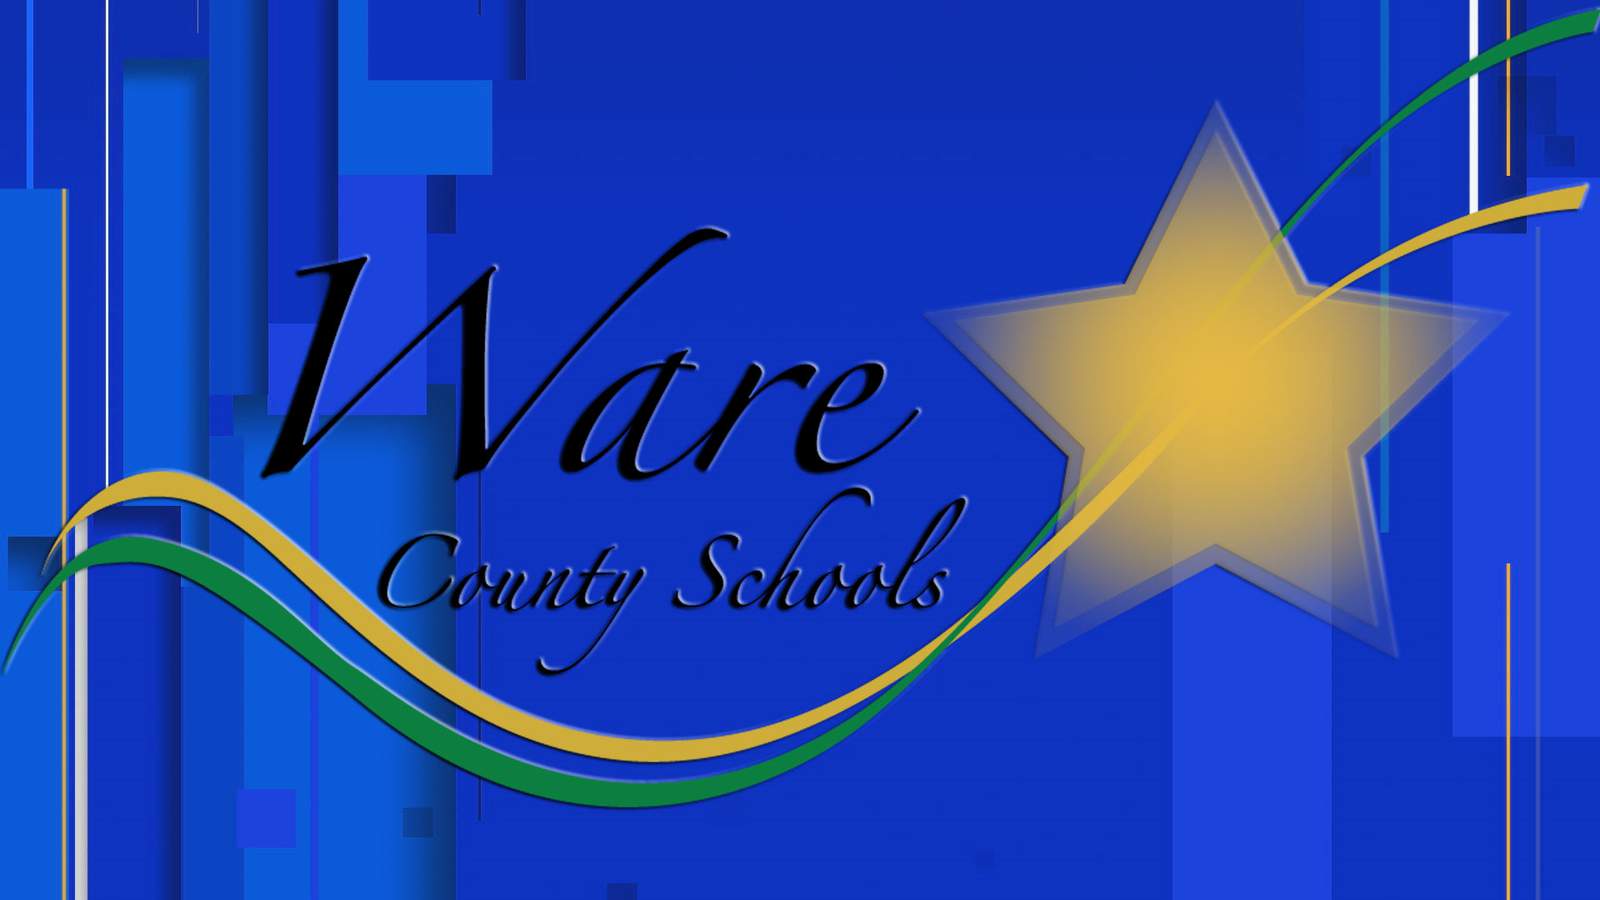 Classes canceled Nov. 20 for Ware County students due to cleaning of school campuses, buses